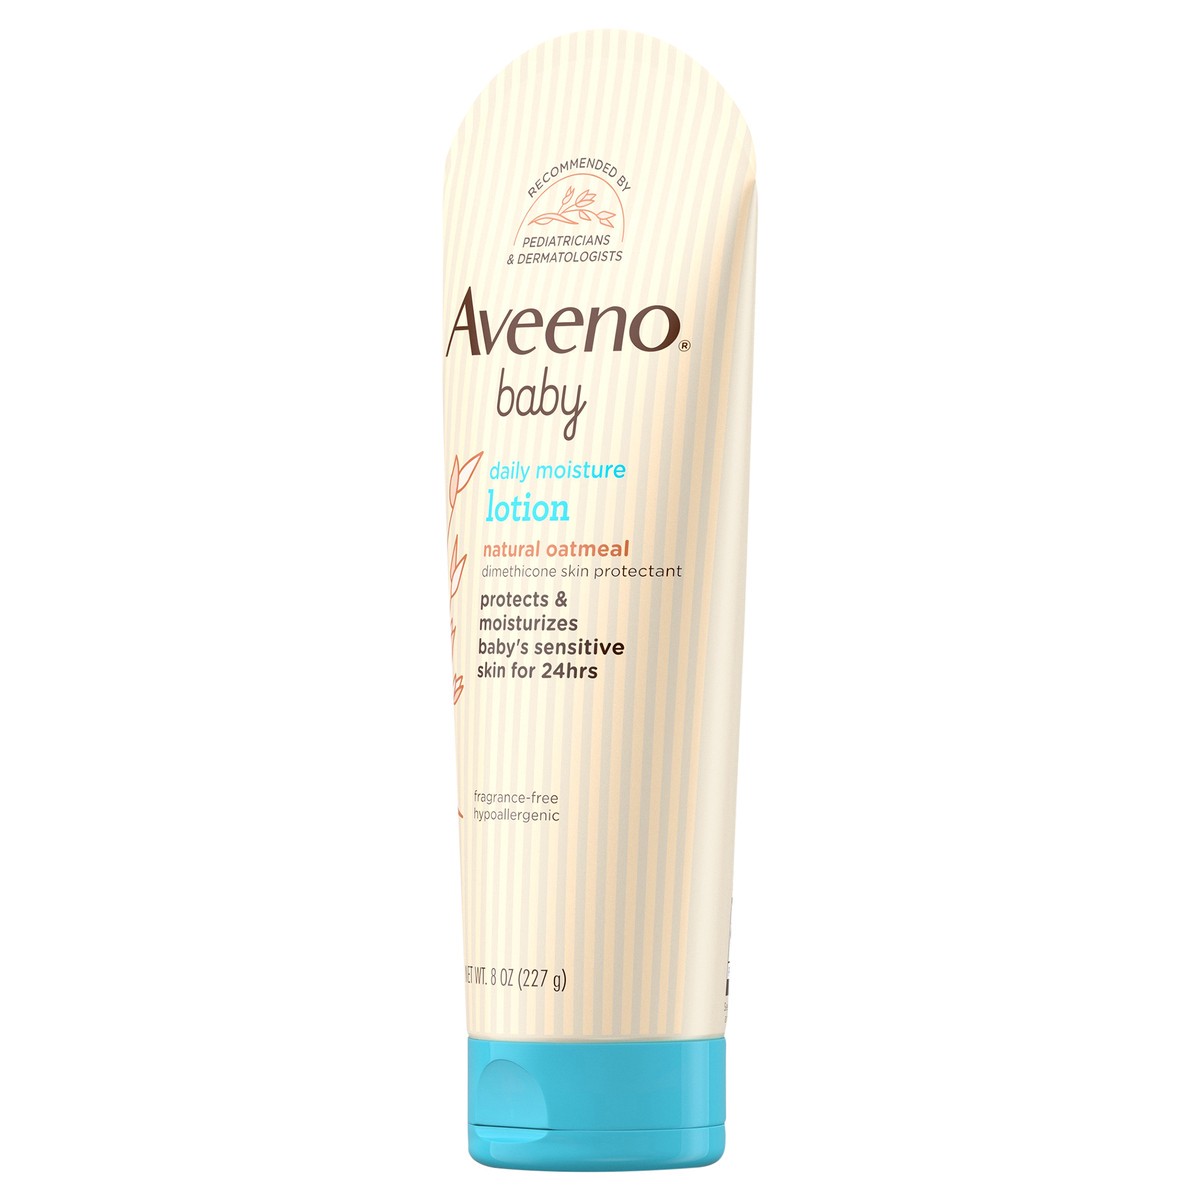 slide 6 of 7, Aveeno Daily Moisture Body Lotion for Delicate Skin, Natural Colloidal Oatmeal & Dimethicone, Hypoallergenic Moisturizing Baby Lotion, Fragrance-, Phthalate- & Paraben-Free, 8 fl. oz, 8 oz